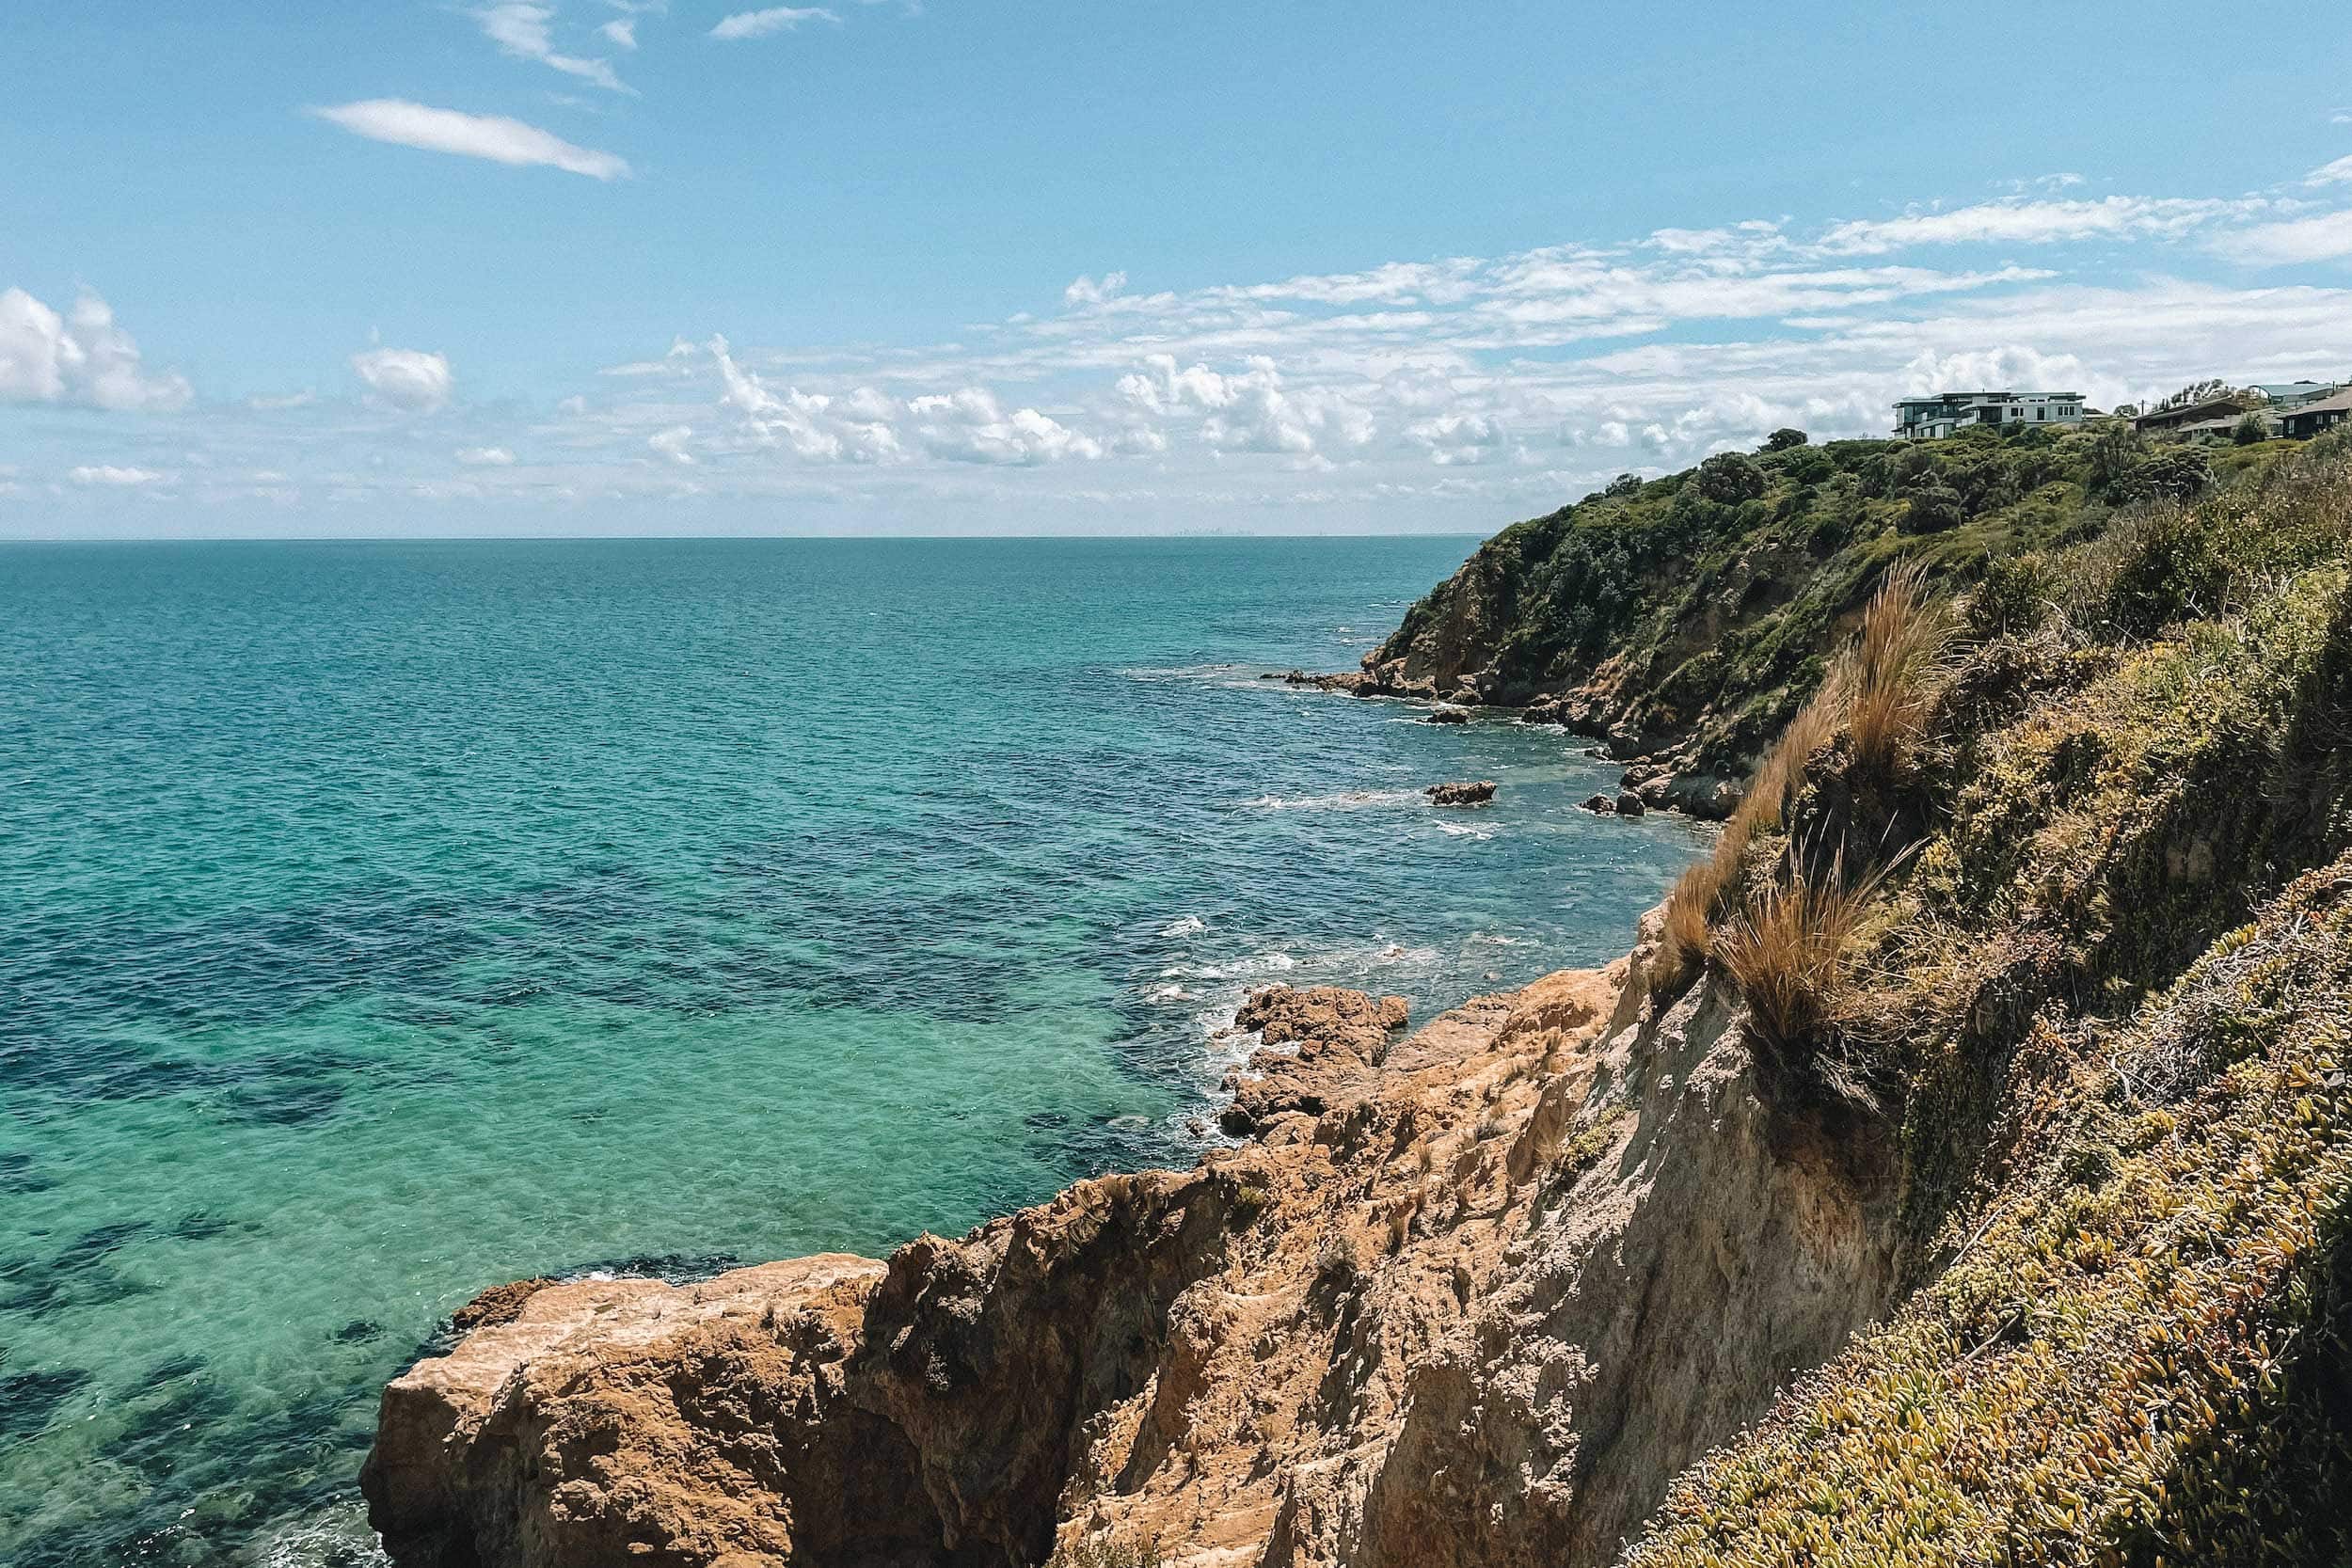 A high viewpoint of the ocean from Mount Martha in Australia